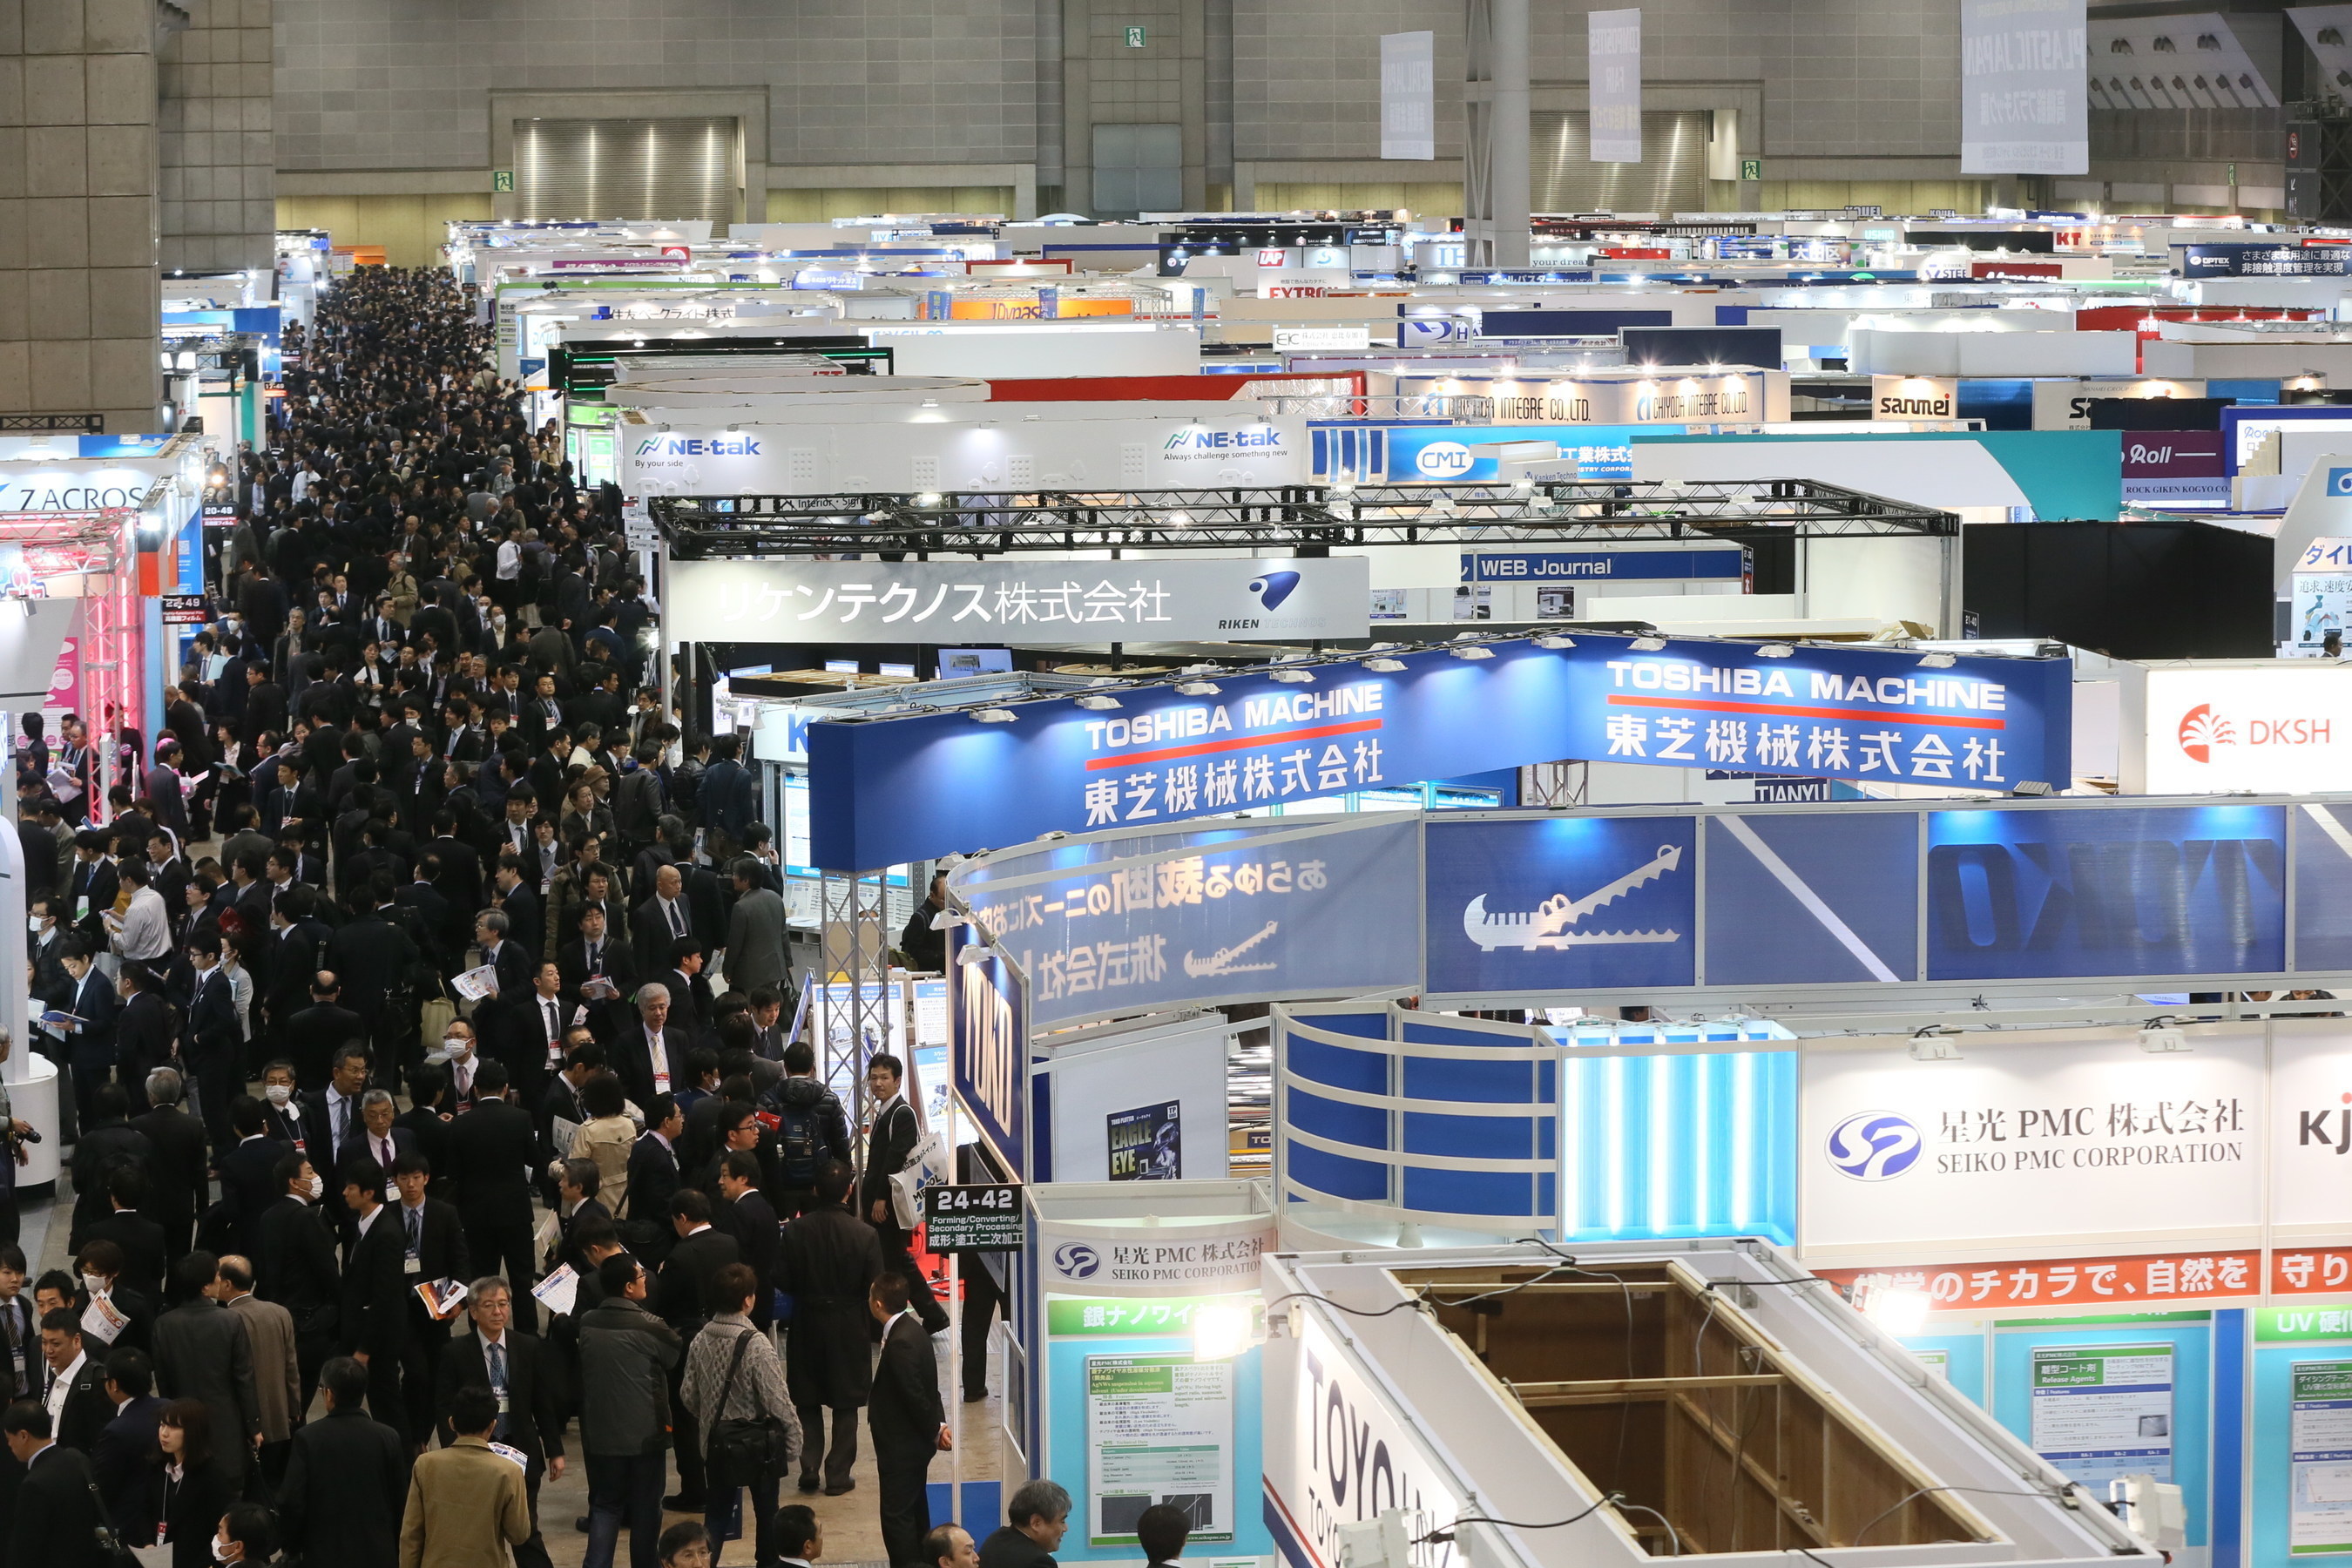 World’s Most Advanced Materials & Equipment Show to be held from April 6-8, 2016 in Tokyo